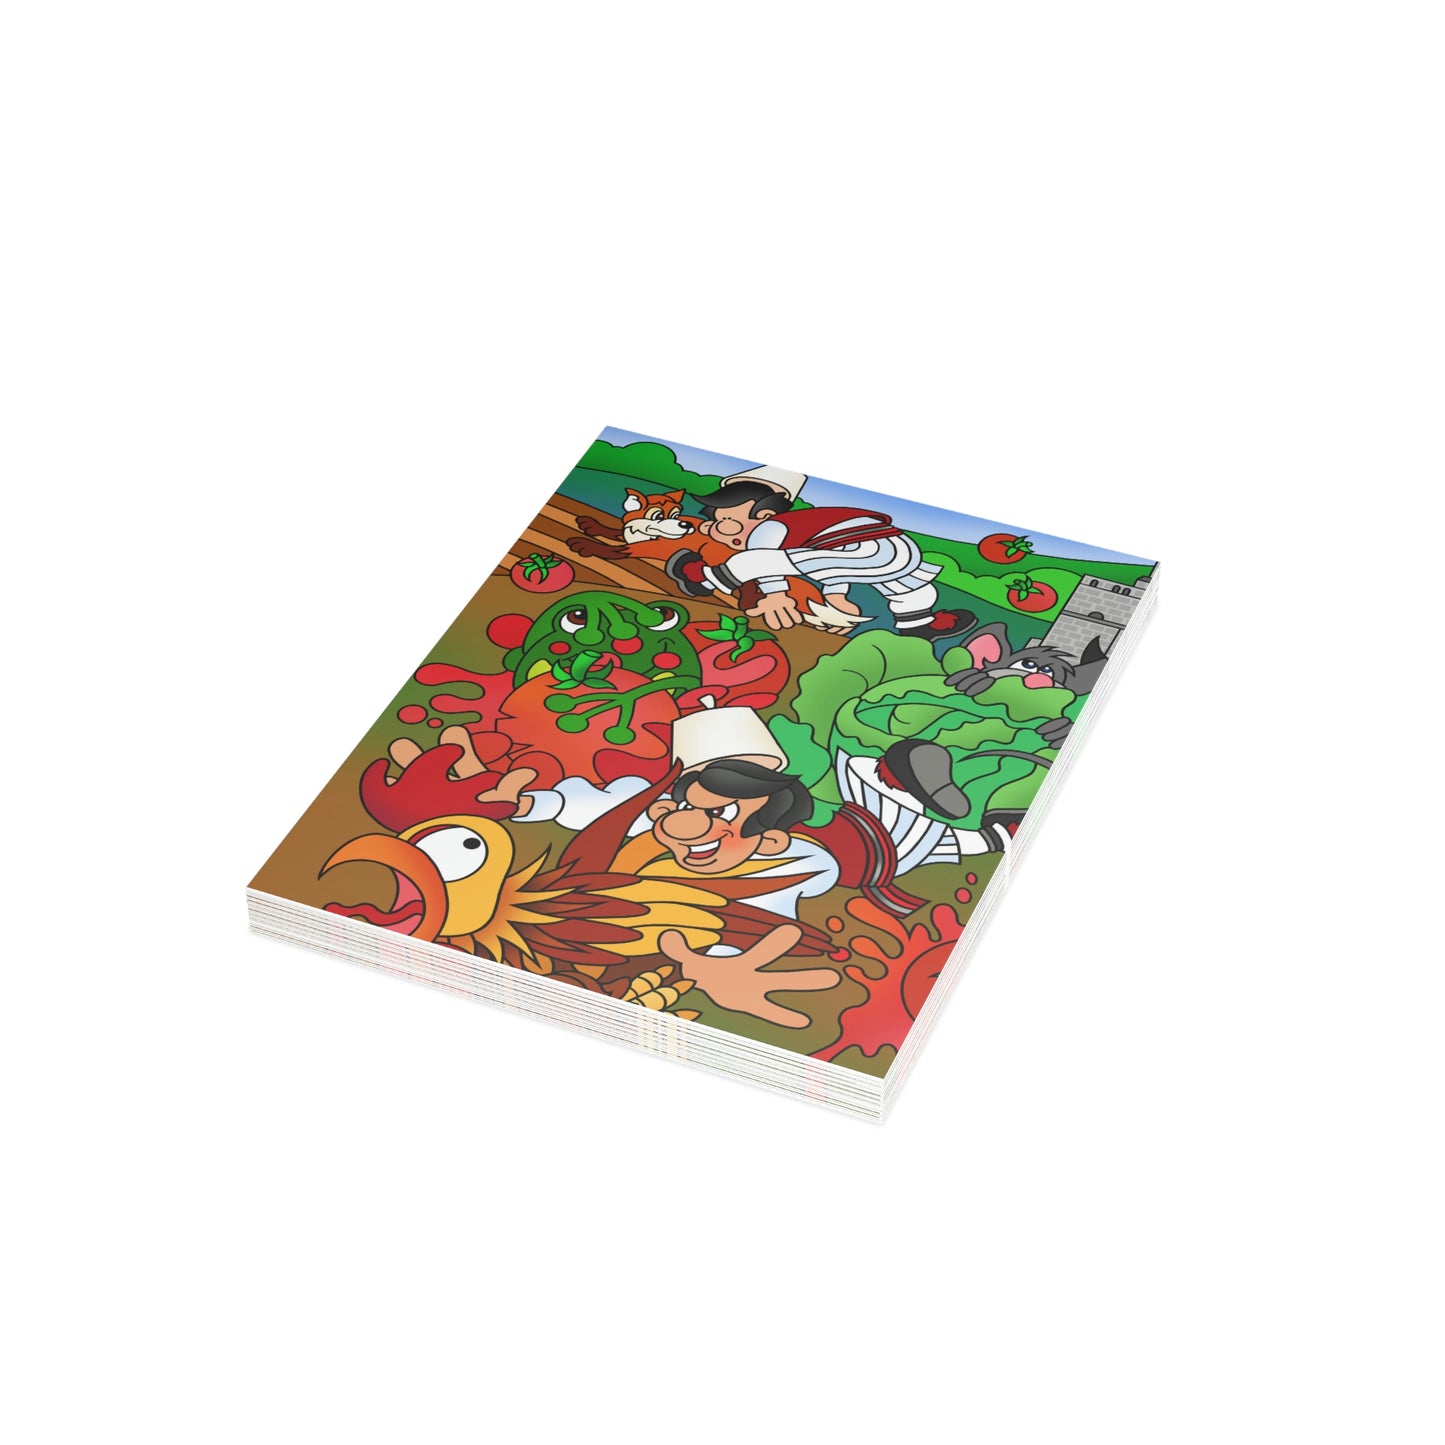 The Half Rooster! Greeting Cards (1, 10, 30, and 50pcs)